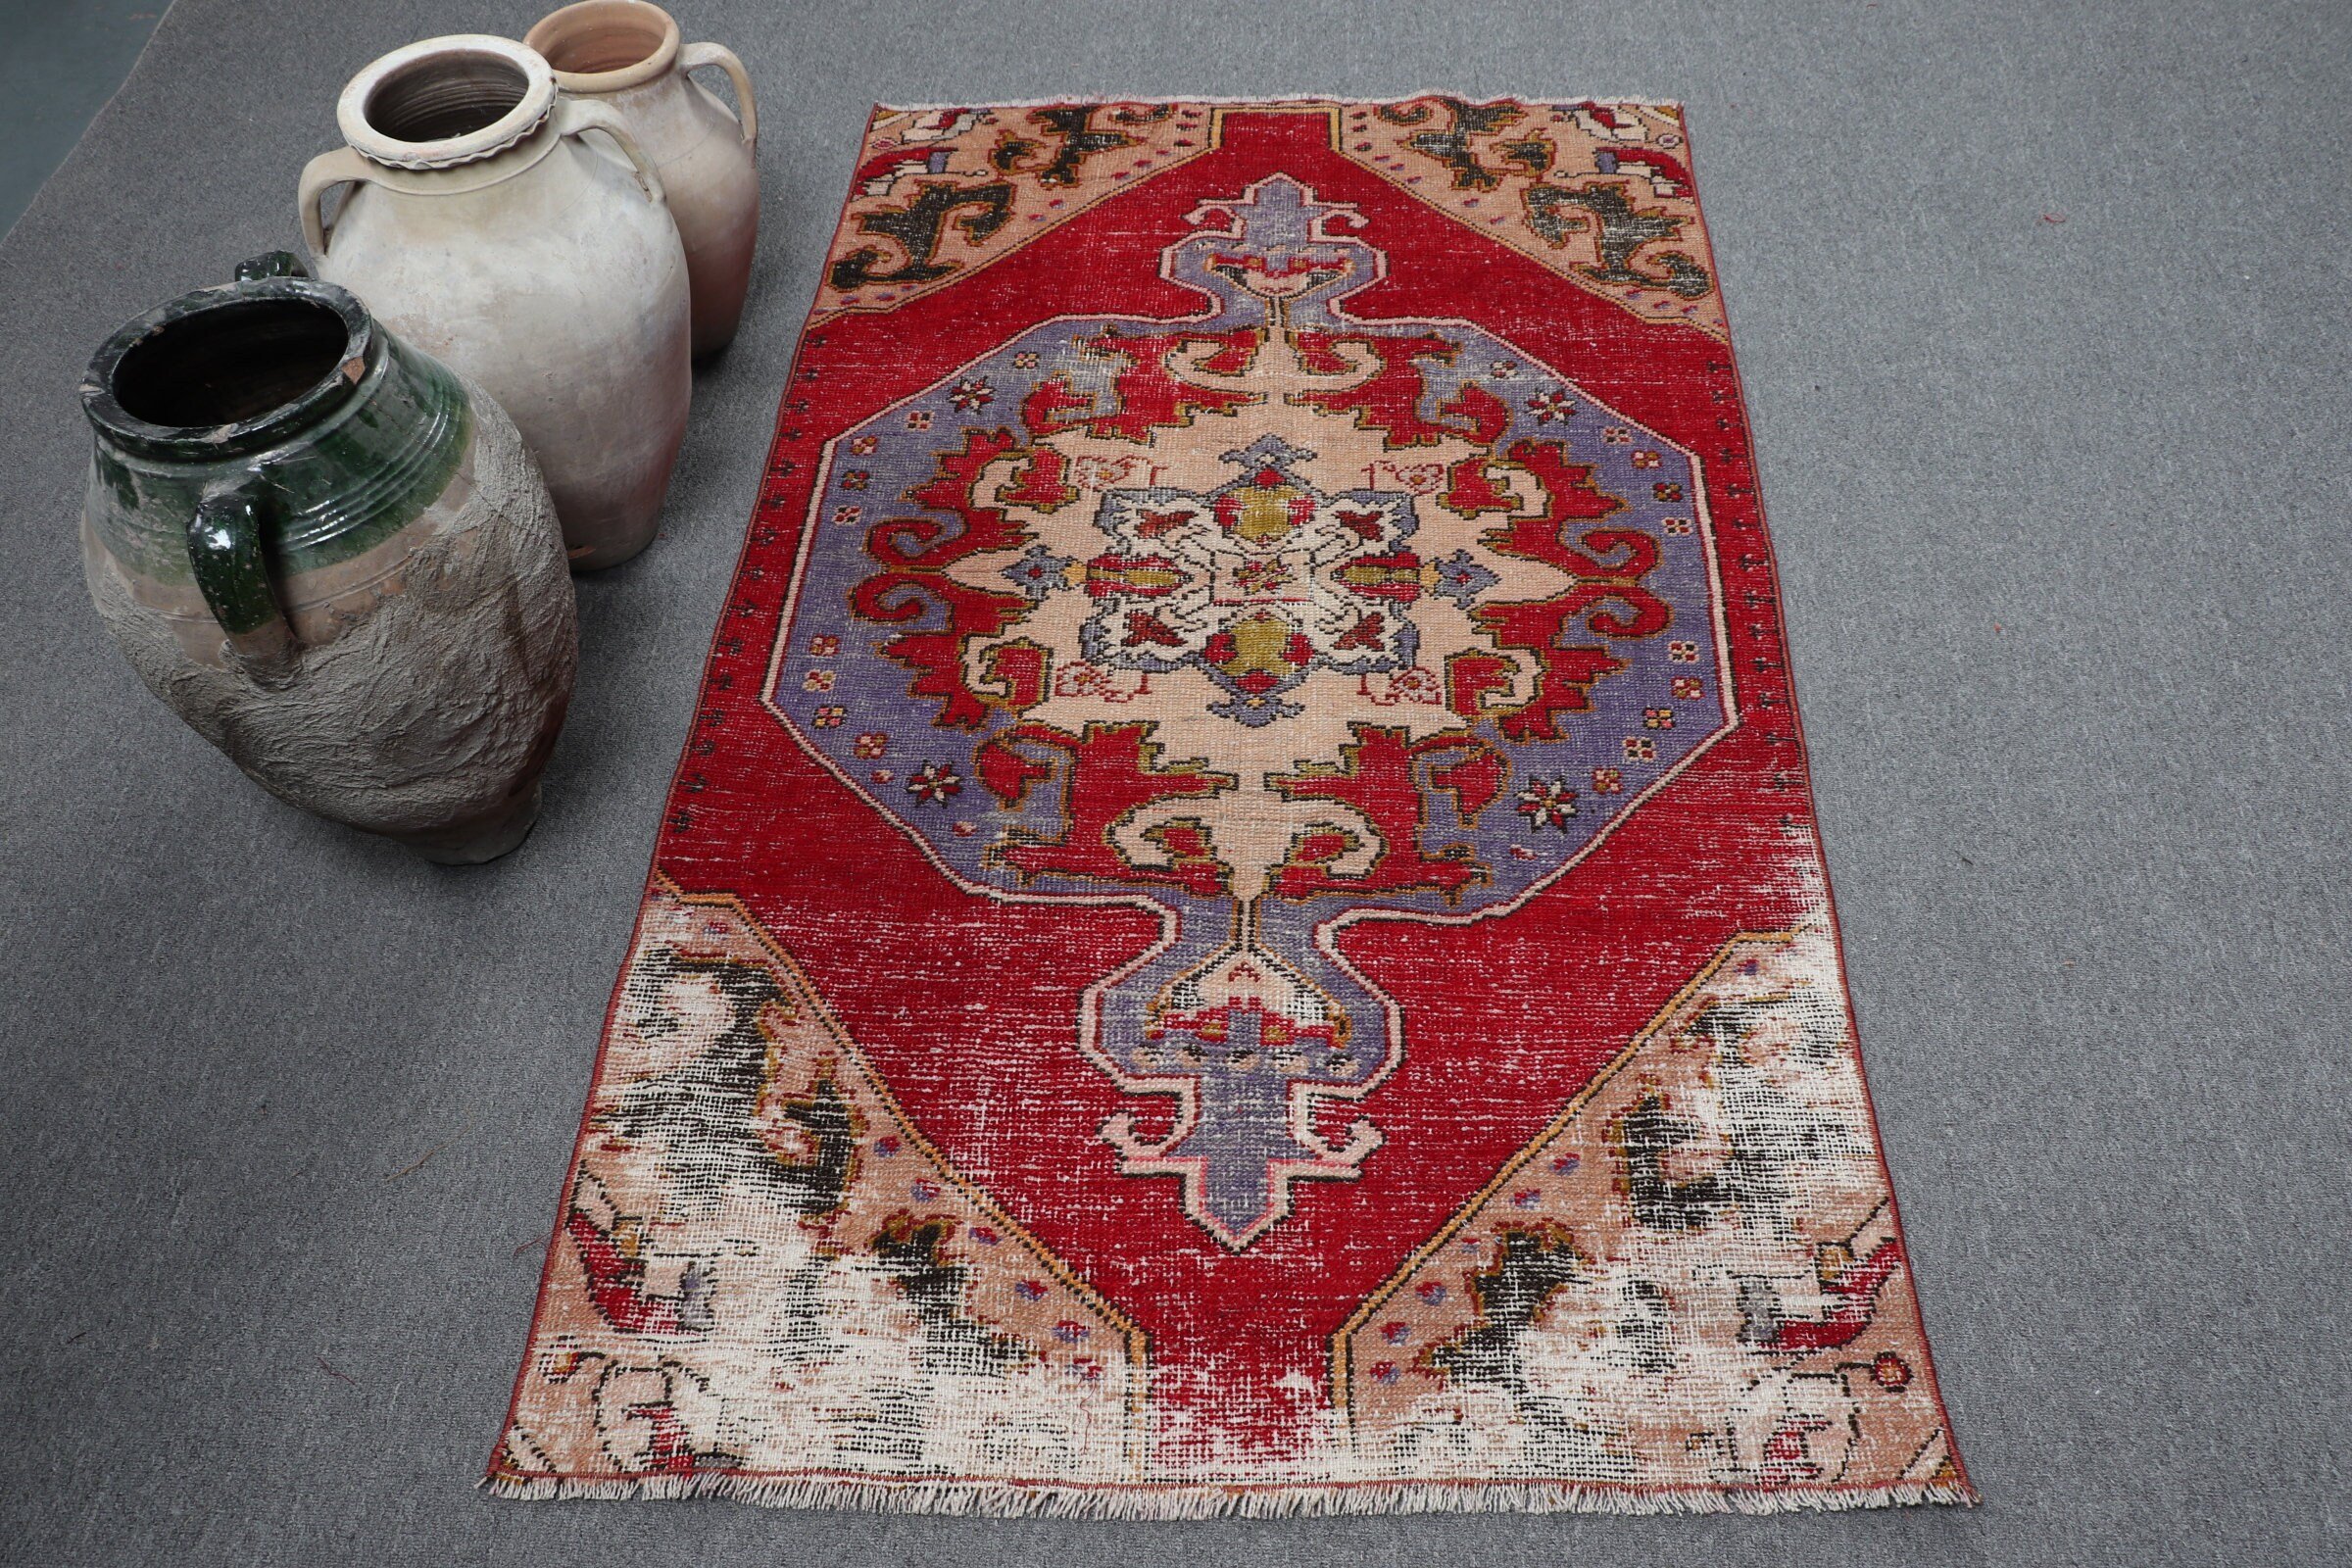 Entry Rugs, Turkish Rugs, Vintage Rug, Anatolian Rug, Bedroom Rug, 3.1x5.3 ft Accent Rug, Rugs for Nursery, Red Oushak Rug, Kitchen Rug